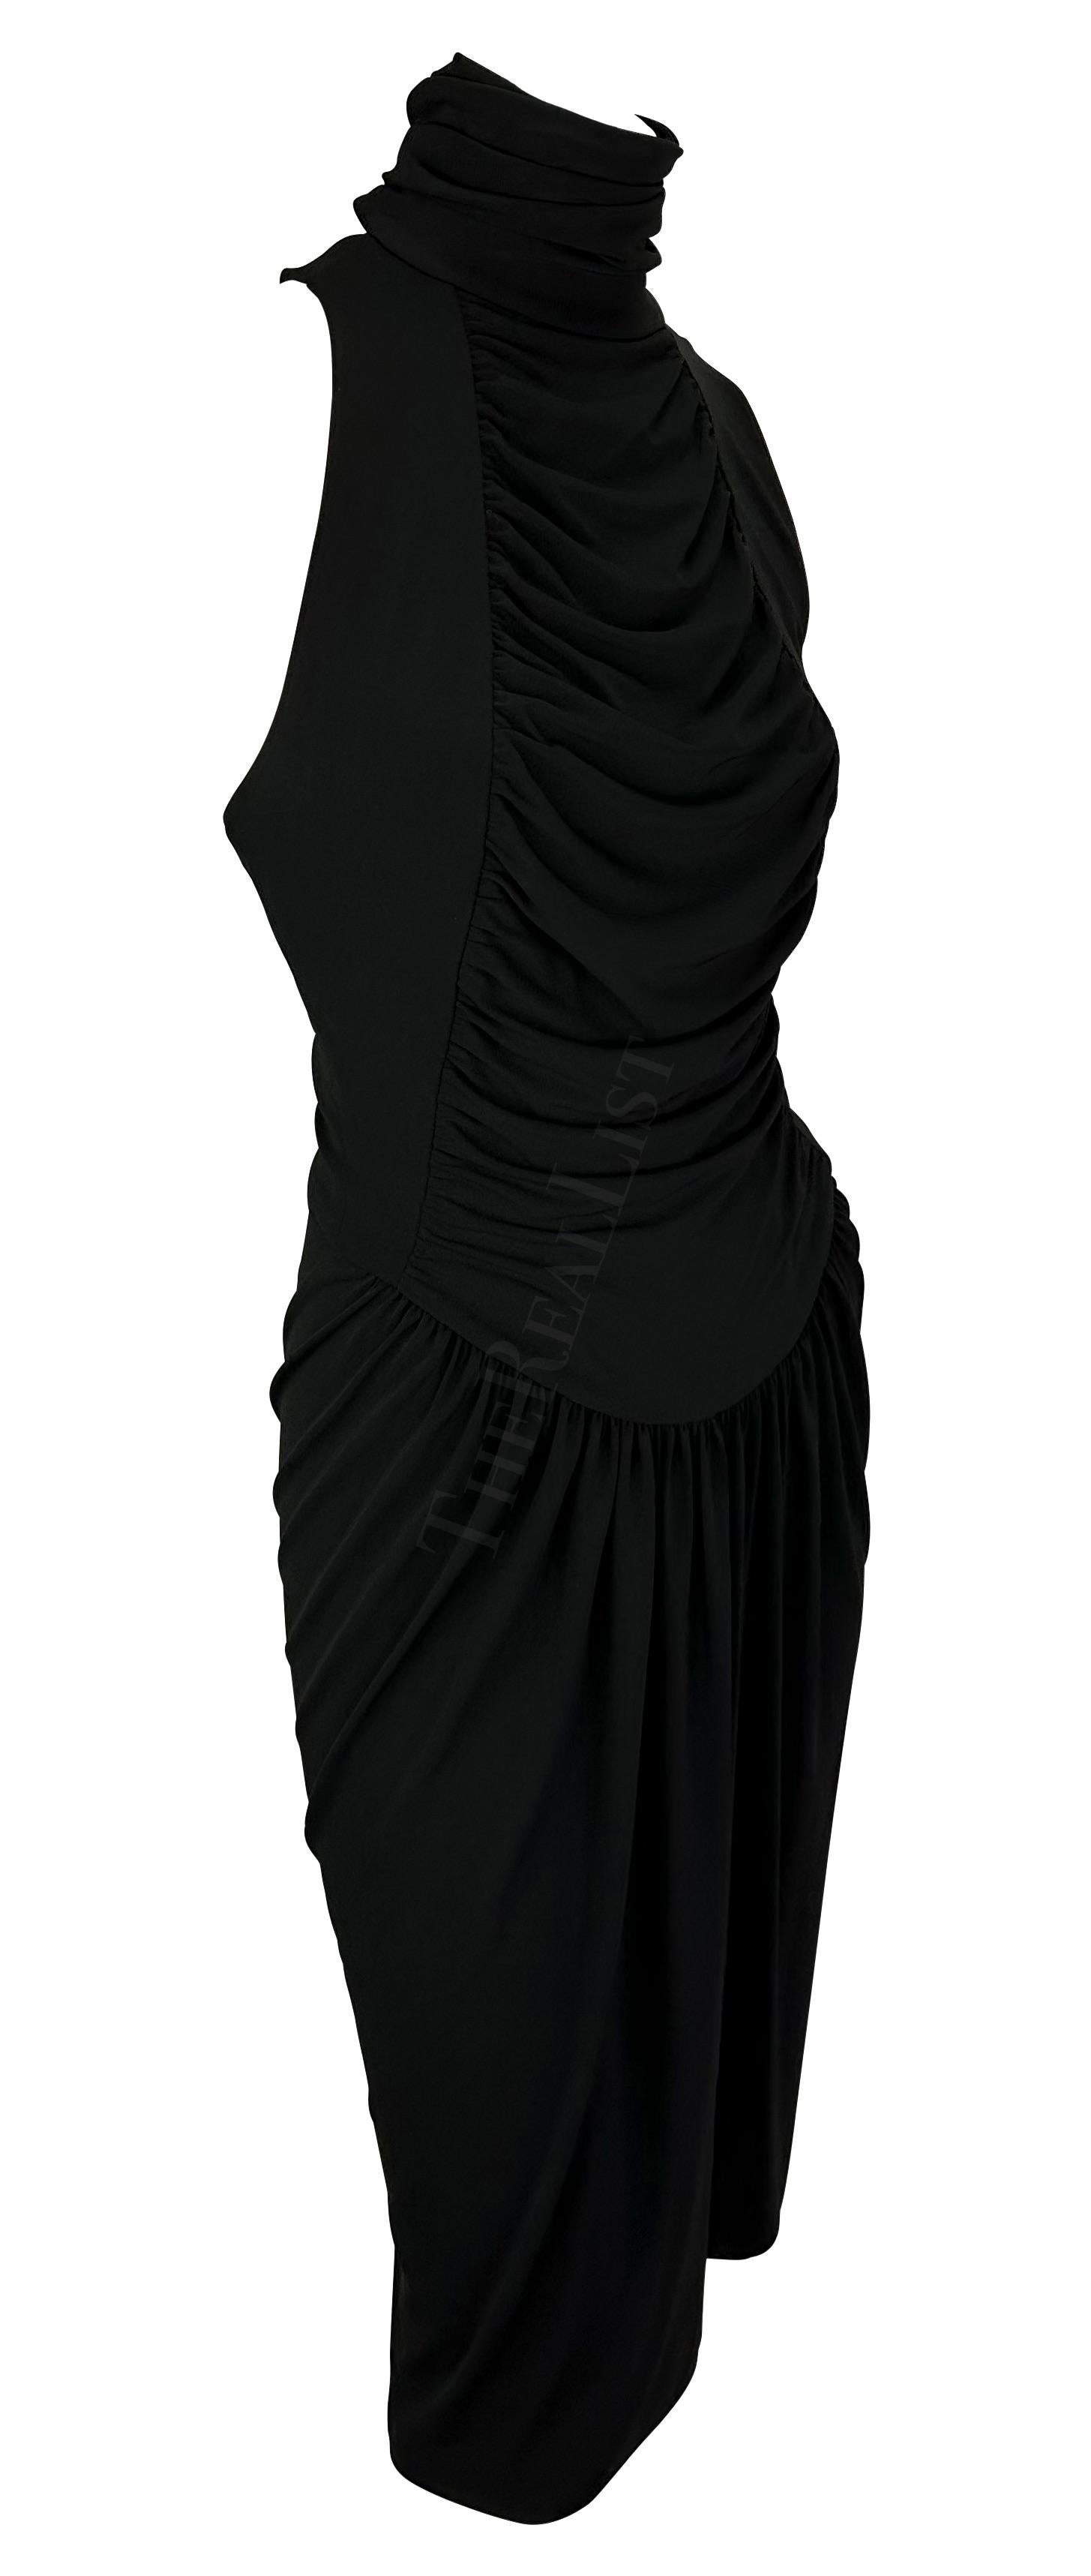 S/S 2003 Karl Lagerfeld Gallery Runway Black Backless Ruched Midi Dress In Excellent Condition For Sale In West Hollywood, CA